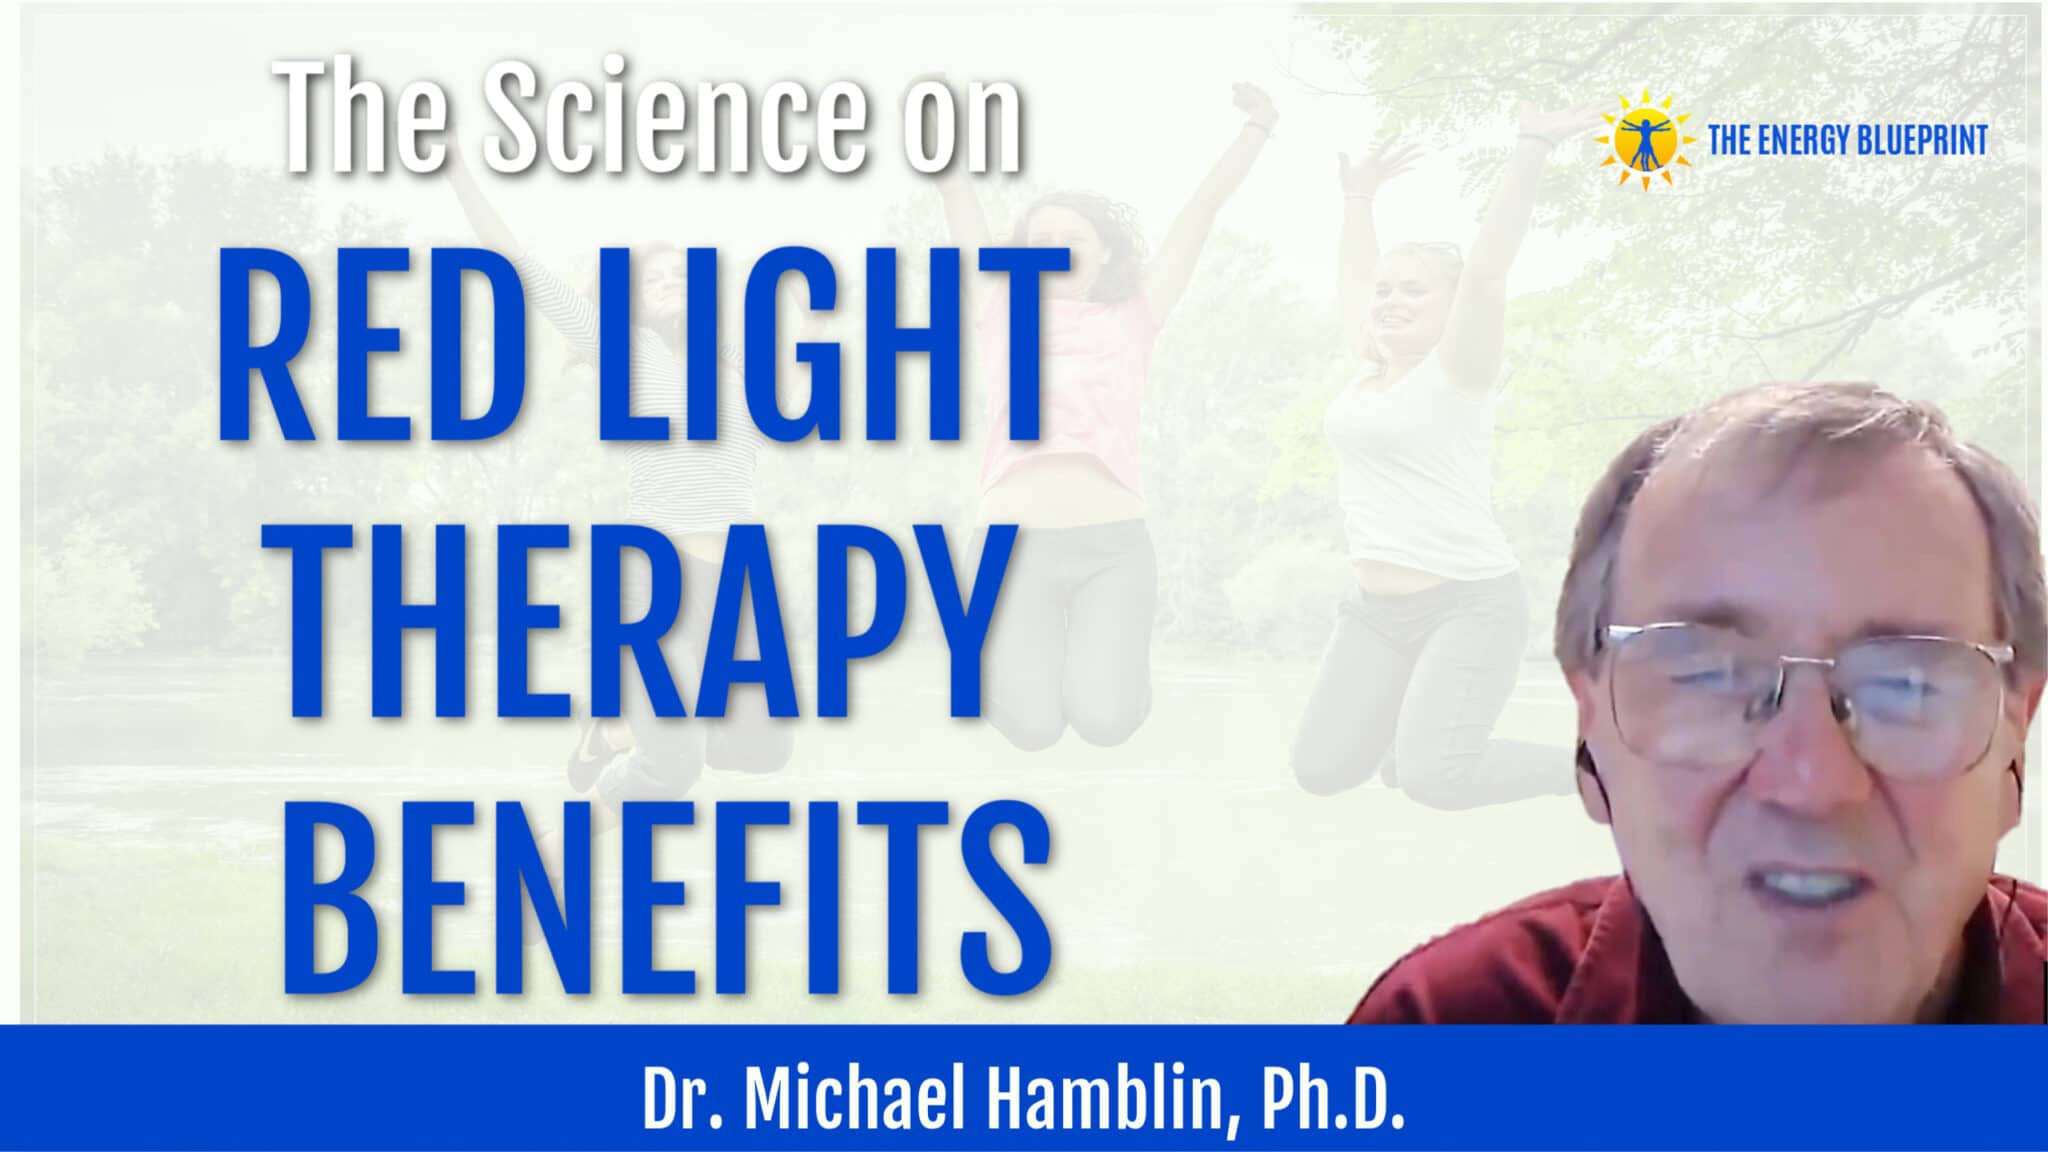 The Science On Red Therapy Benefits with Dr. Michael Hamblin - The Energy